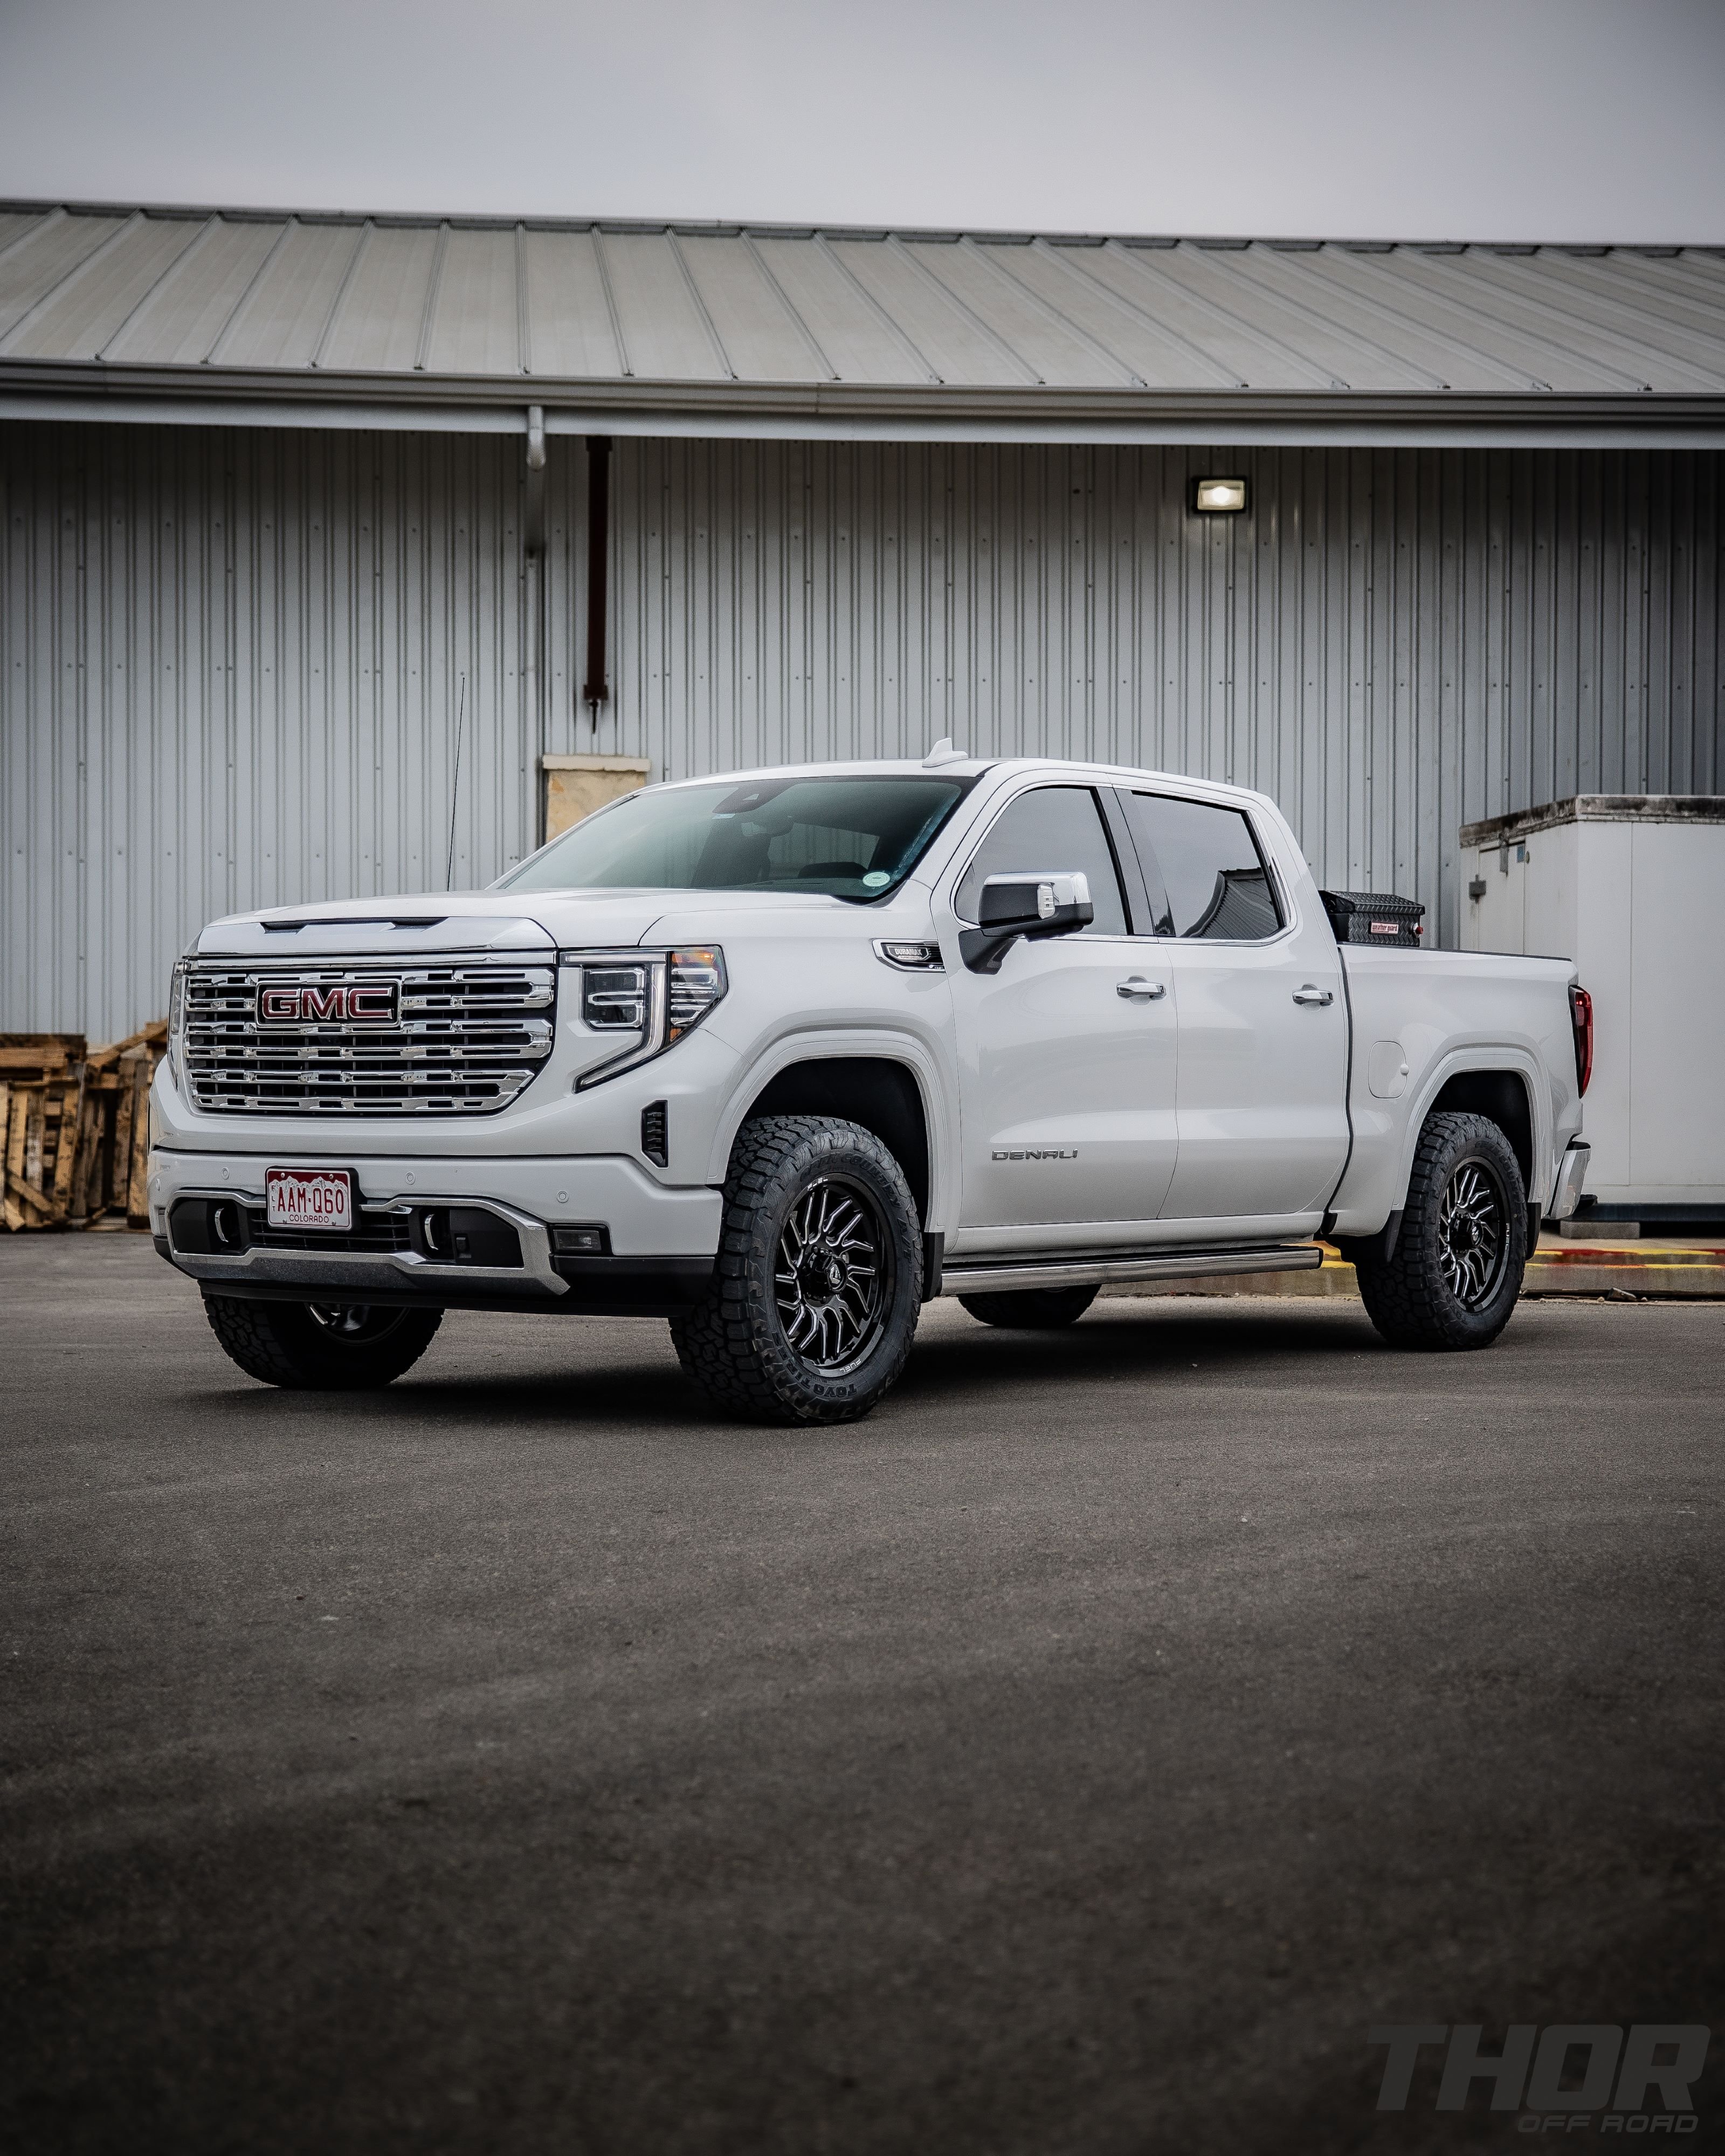 2024 GMC Sierra 1500 Denali in White with Cognito 3" Leveling Kit with Fox 2.0 Shocks, Fuel Off-Road Hurricane 20x9" Wheels, 285/60R20 Toyo Open Country A/T III Tires